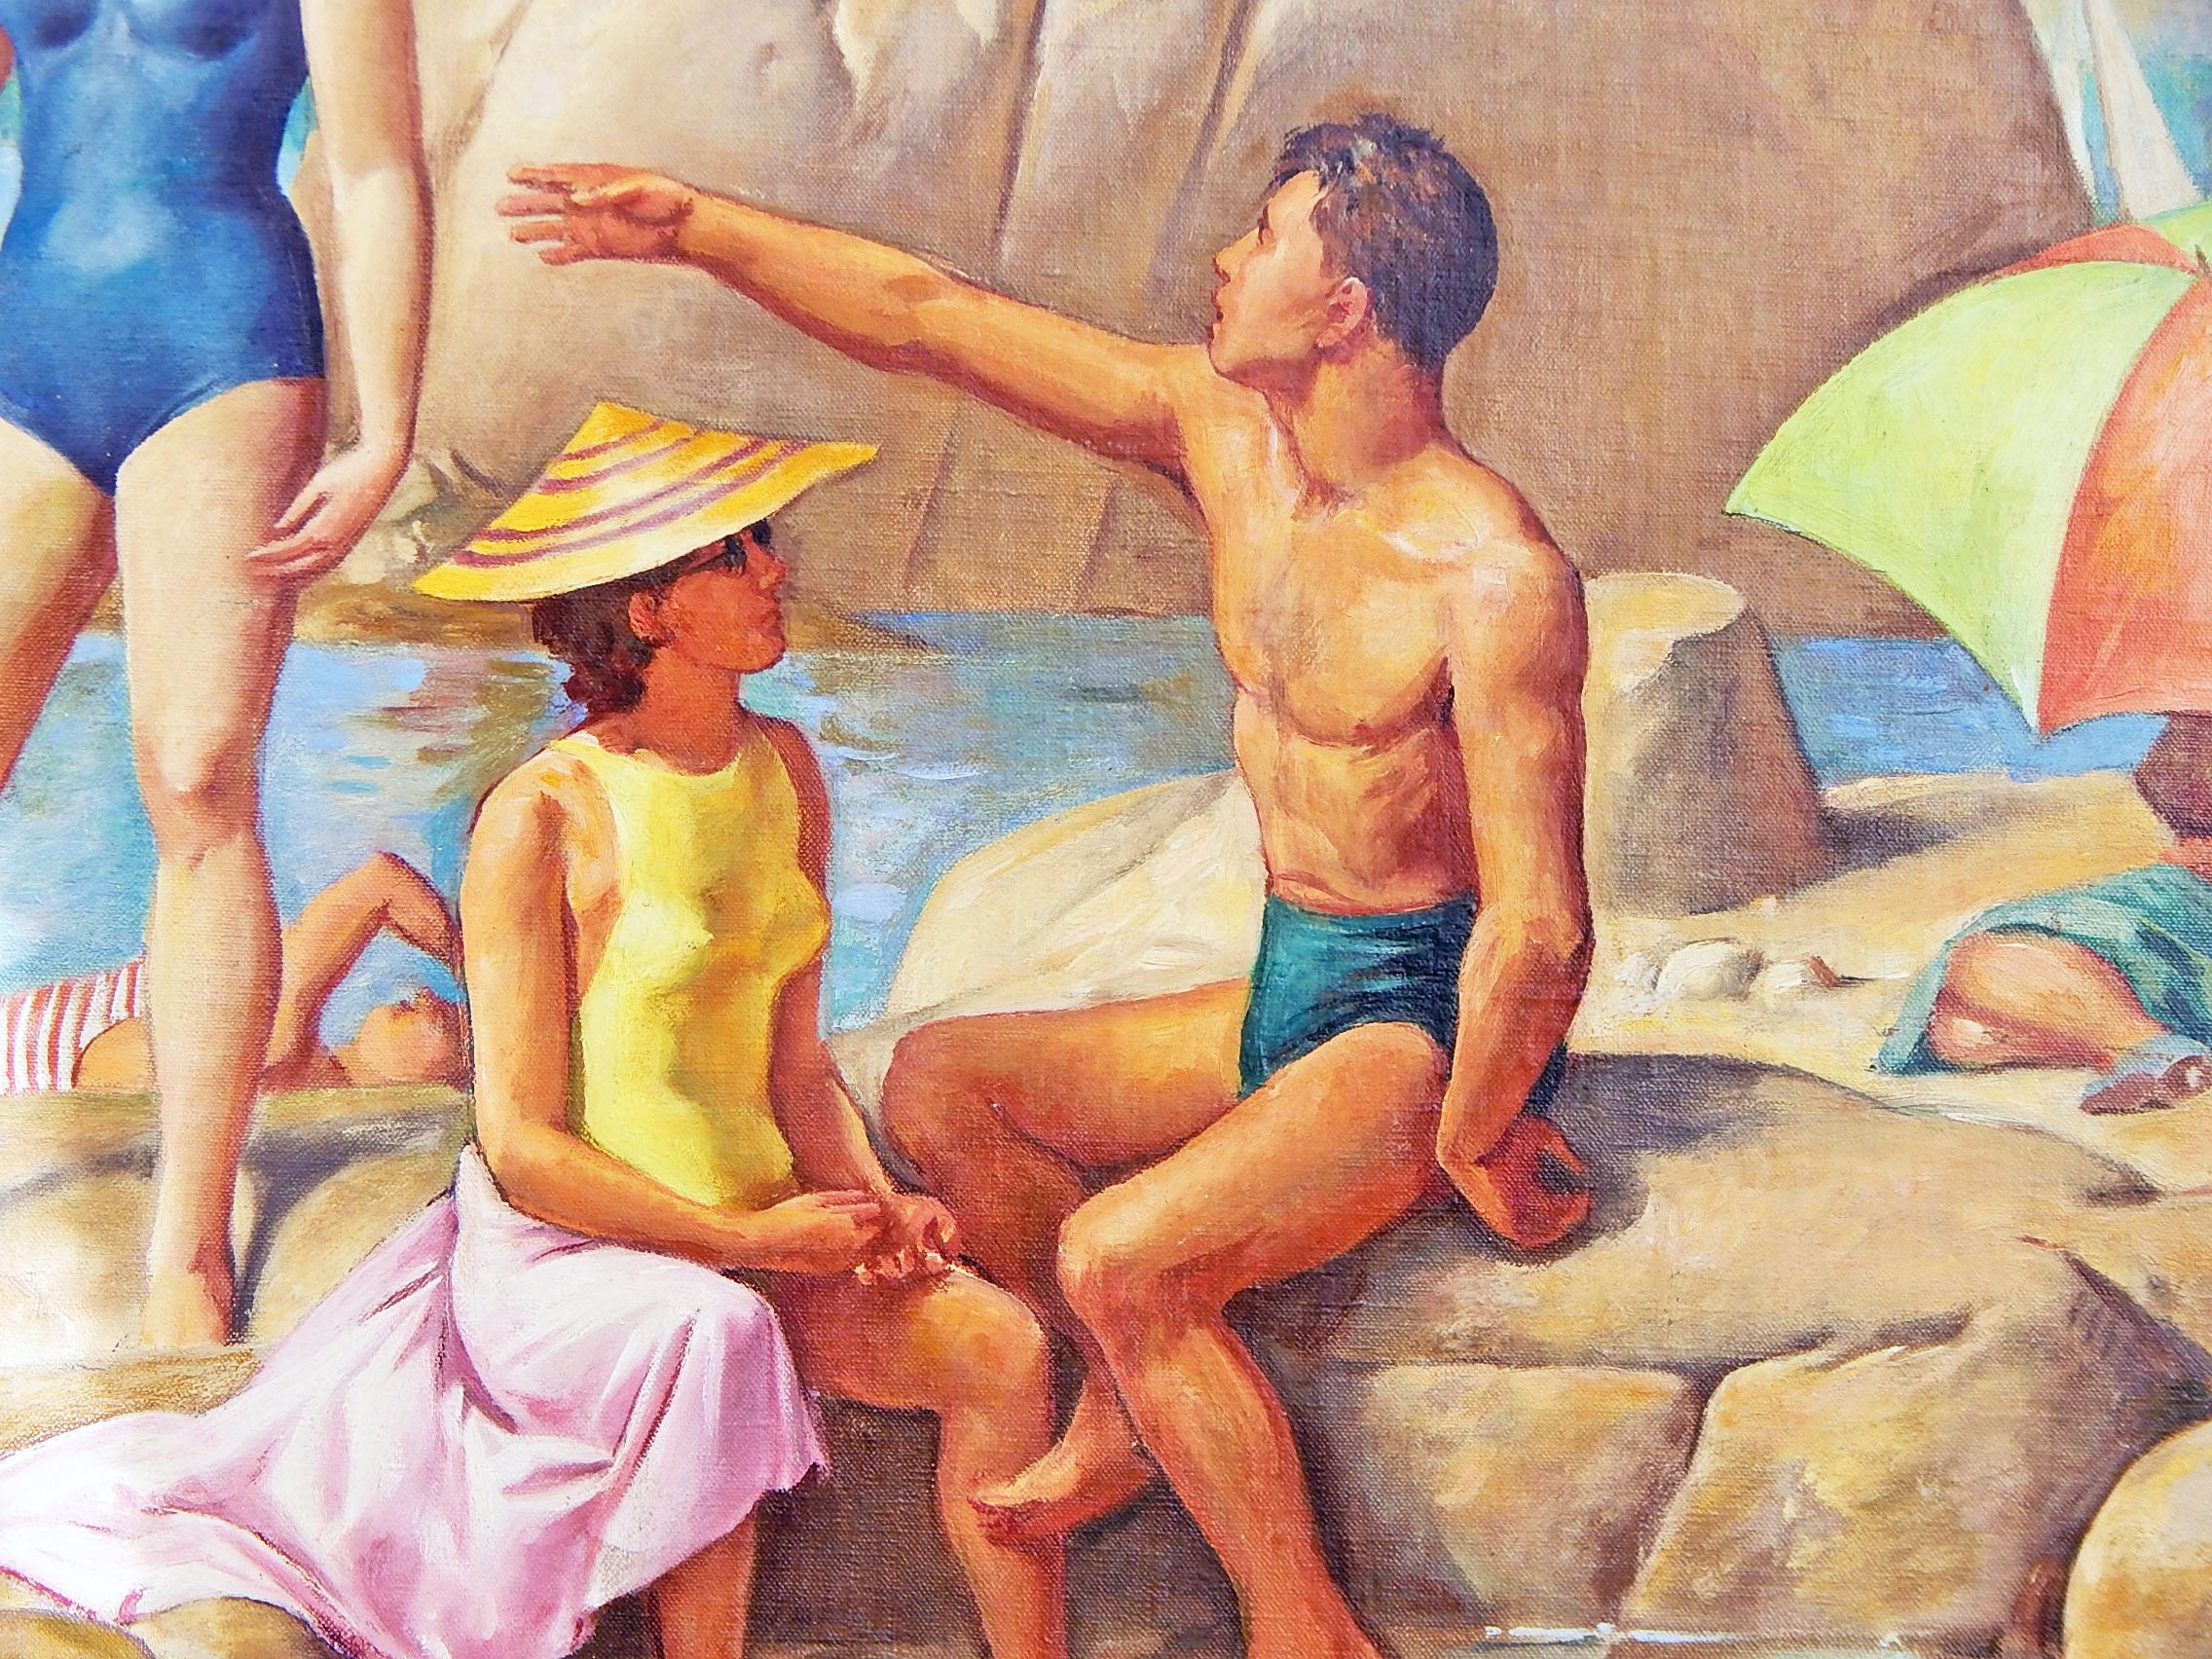 Full of sunlight and brilliant color, this scene of swimmers and boaters cavorting and sunning among the large boulders along the edge of Wingaersheek Beach in Cape Ann, on the north shore of Boston, is an important depiction of 1930s life in